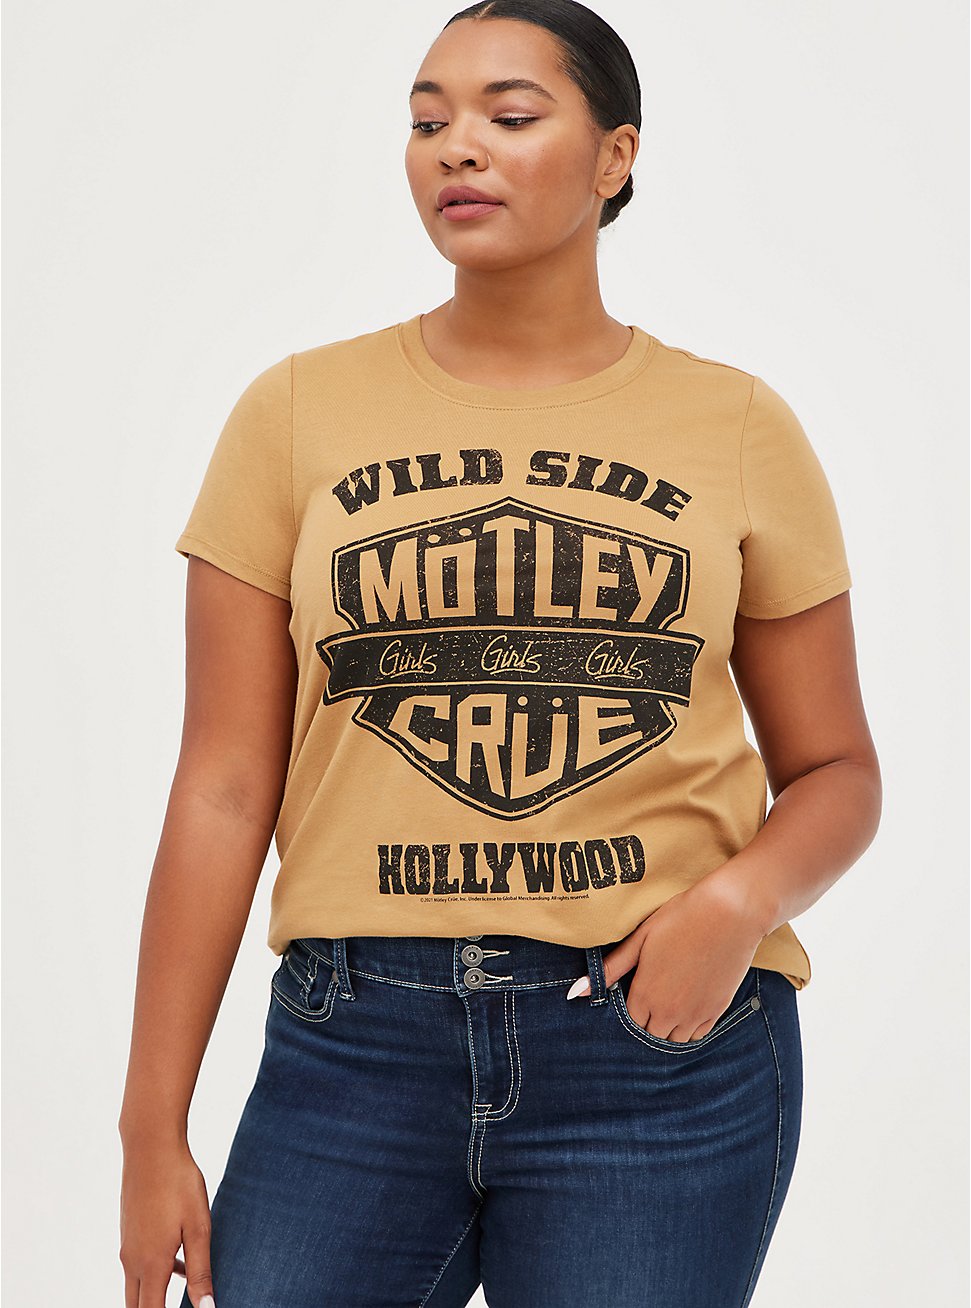 Classic Fit Crew Tee - Mötley Crüe Tan, TAUPE, hi-res